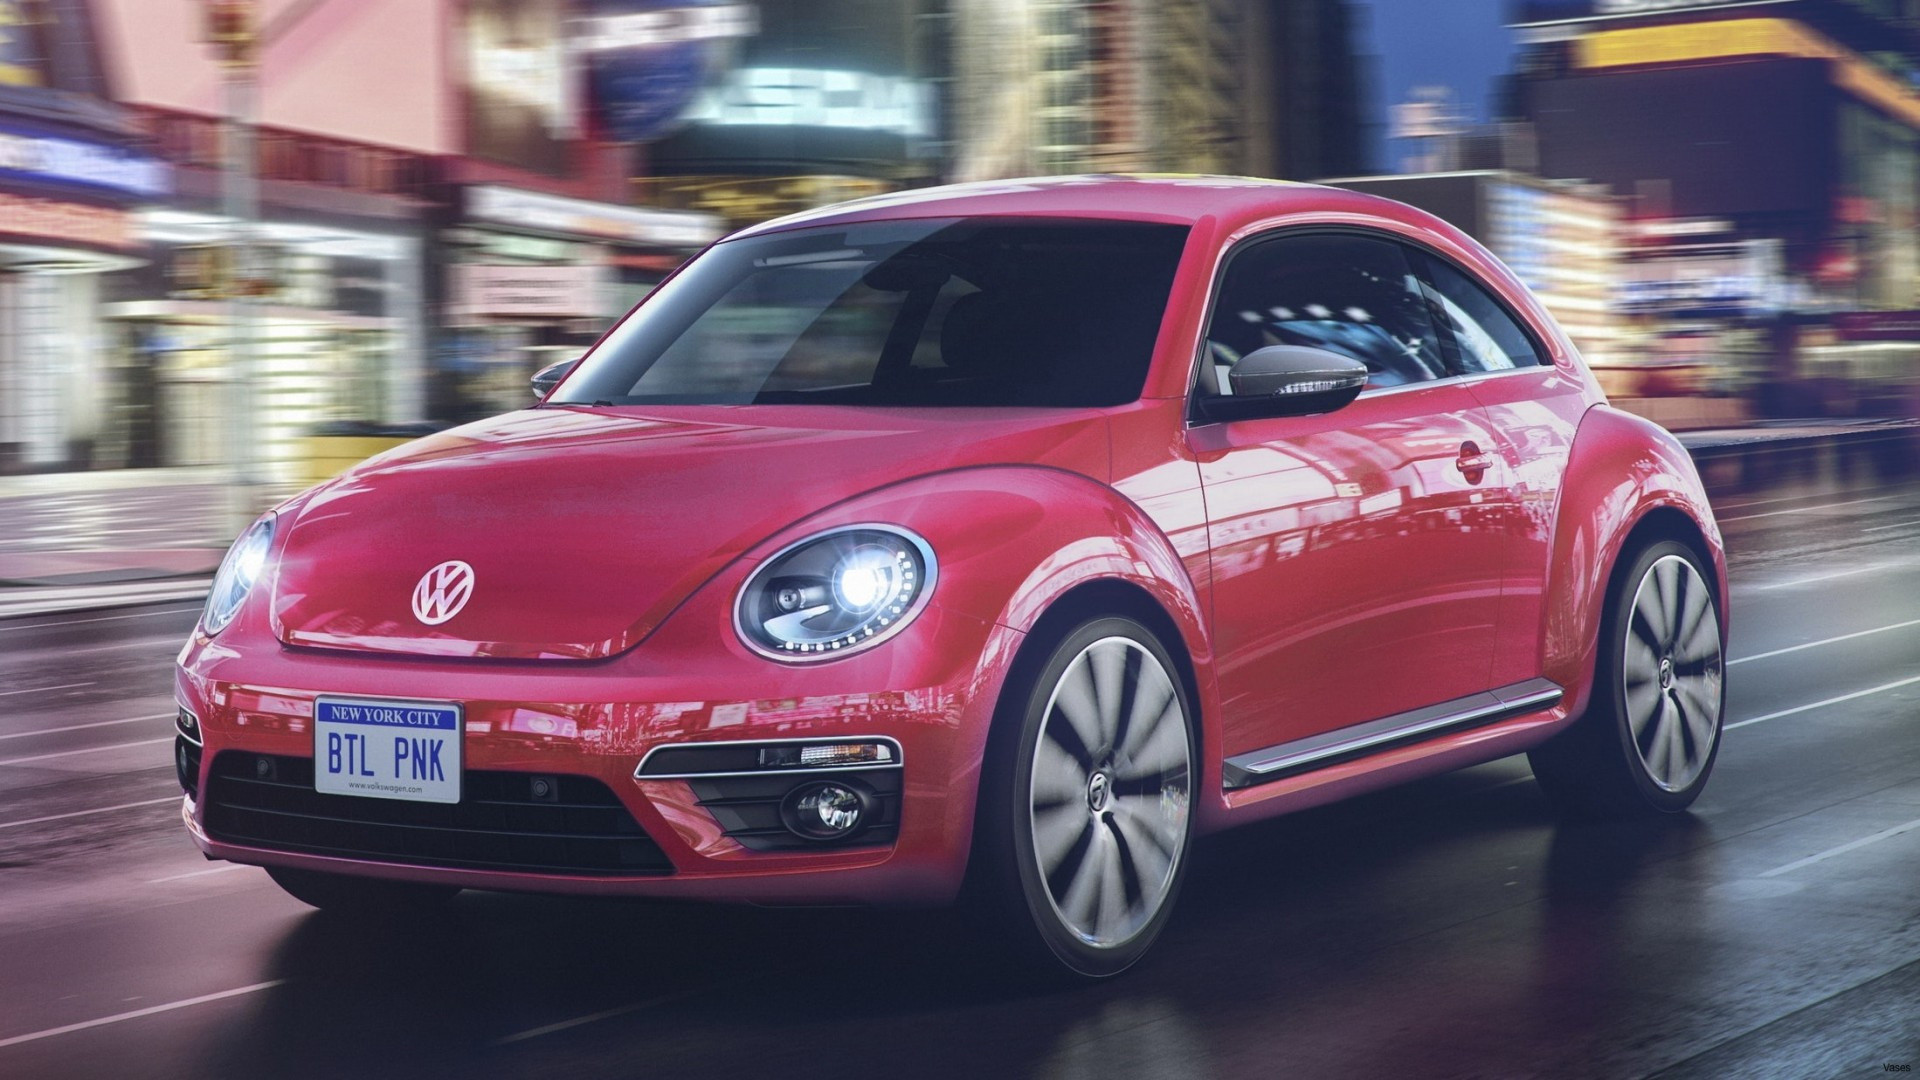 29 Spectacular Vw Beetle Vase 2024 free download vw beetle vase of 2018 volkswagen beetle pictures car releasedate club car release date in 2018 volkswagen beetle price a volkswagen beetle car door support beautiful for vw price and review